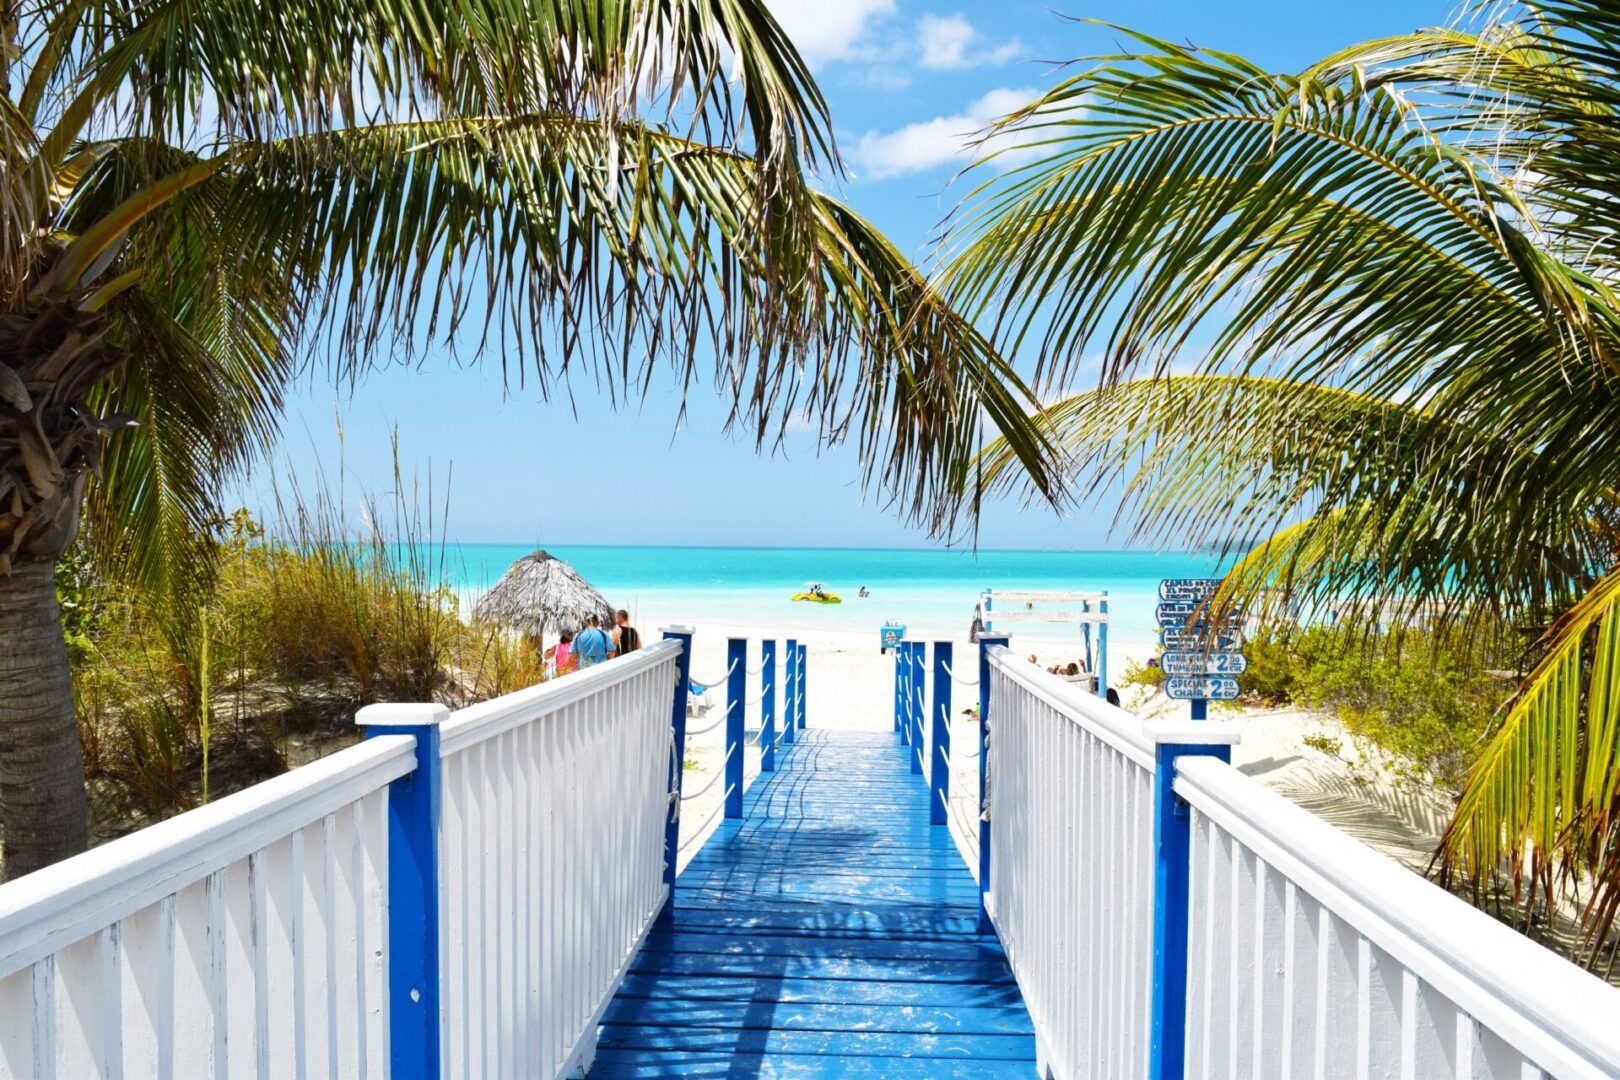 A boardwalk leading to the beach with palm trees.